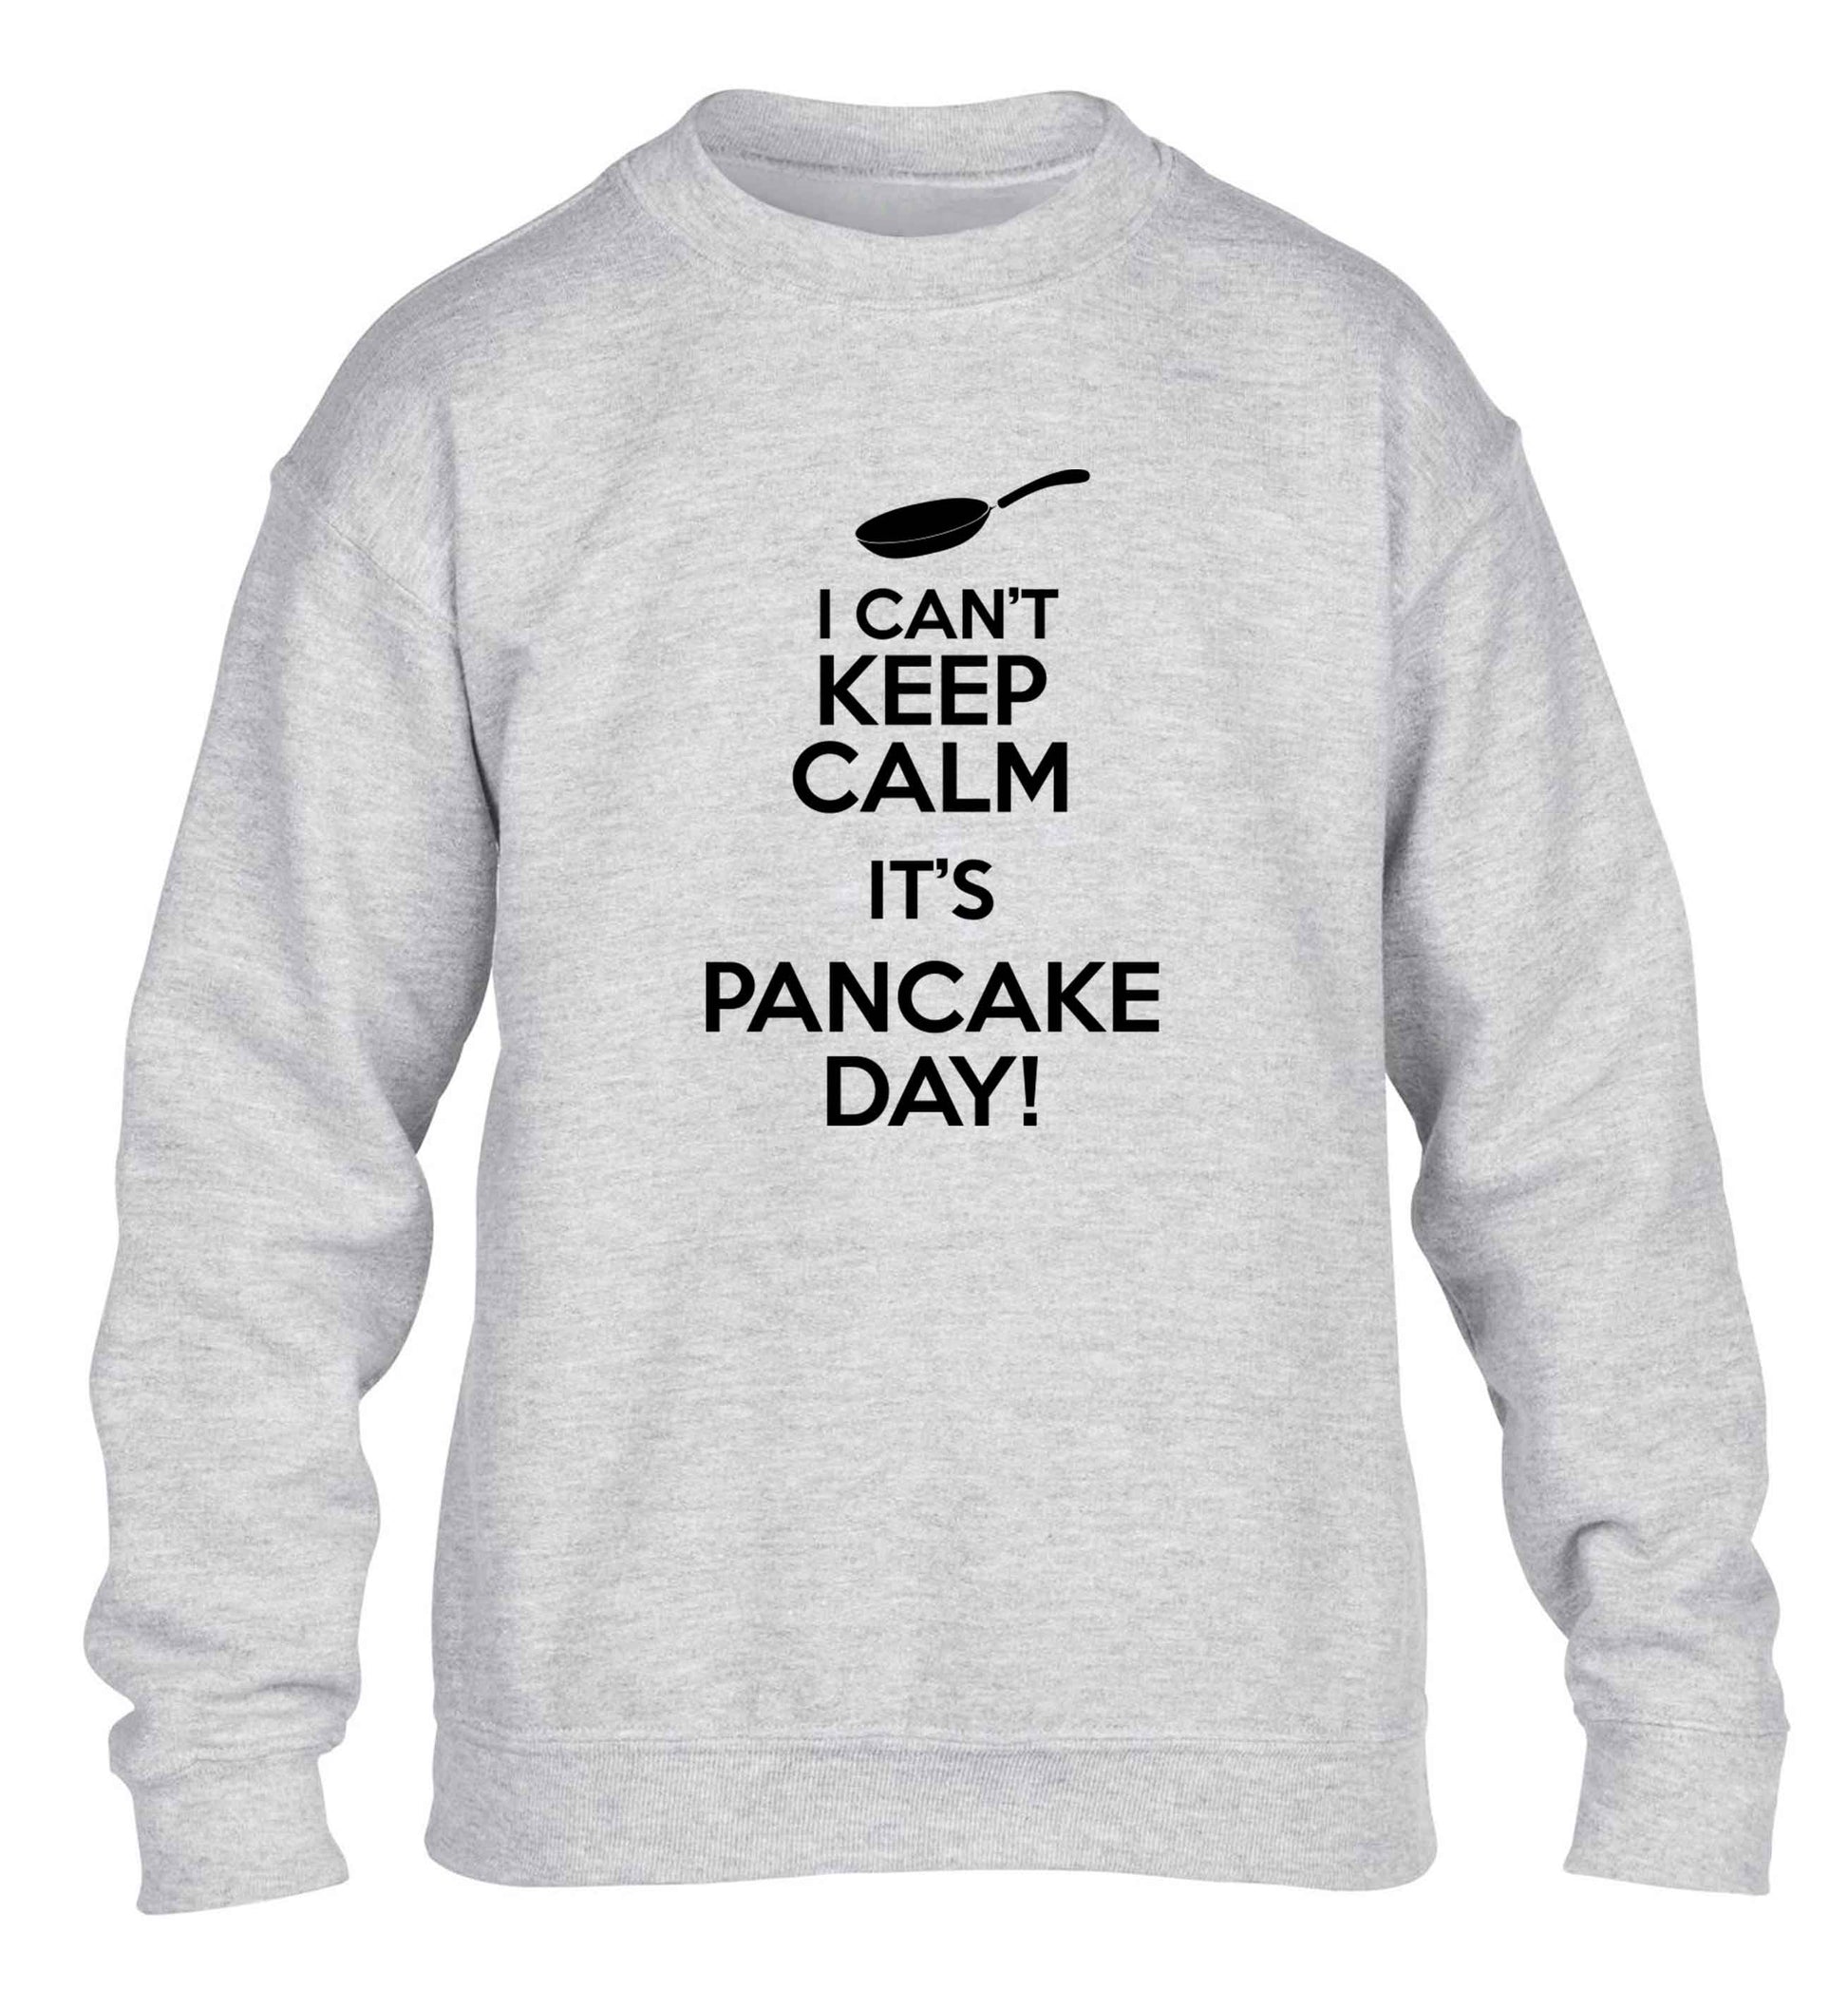 I can't keep calm it's pancake day! children's grey sweater 12-13 Years